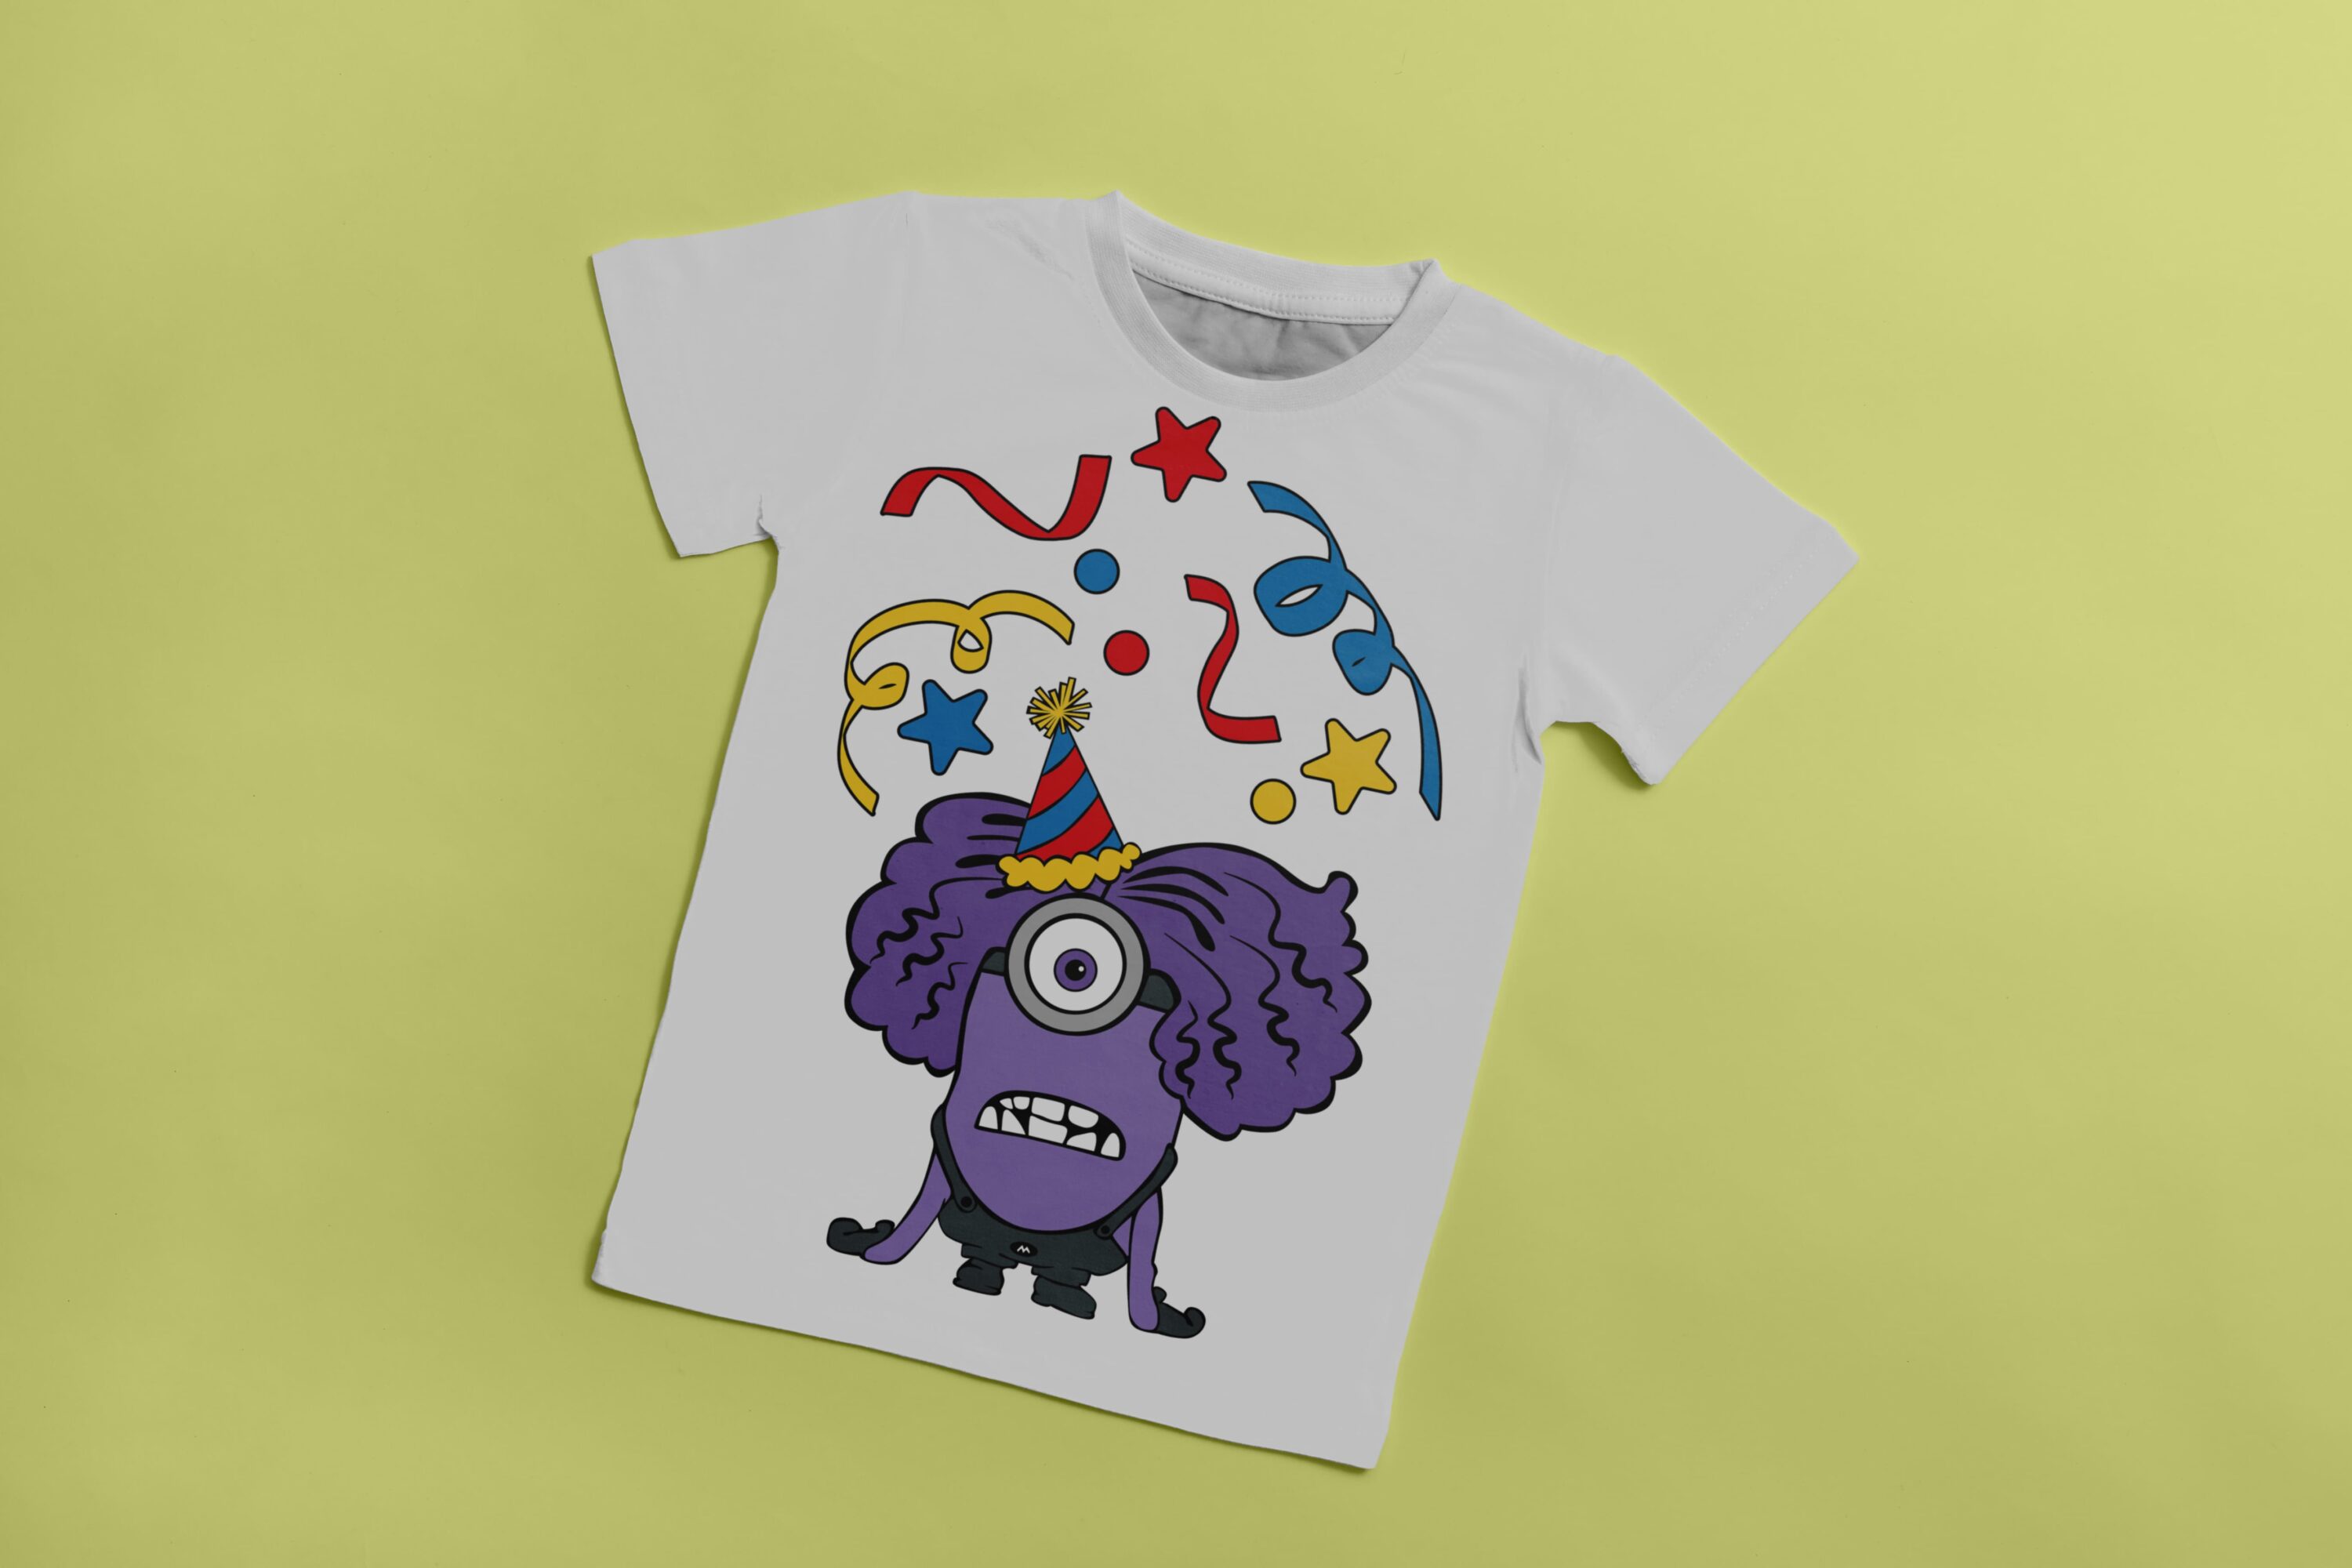 White T-shirt with an image of a surprised character - Evil Minion with a party hat.